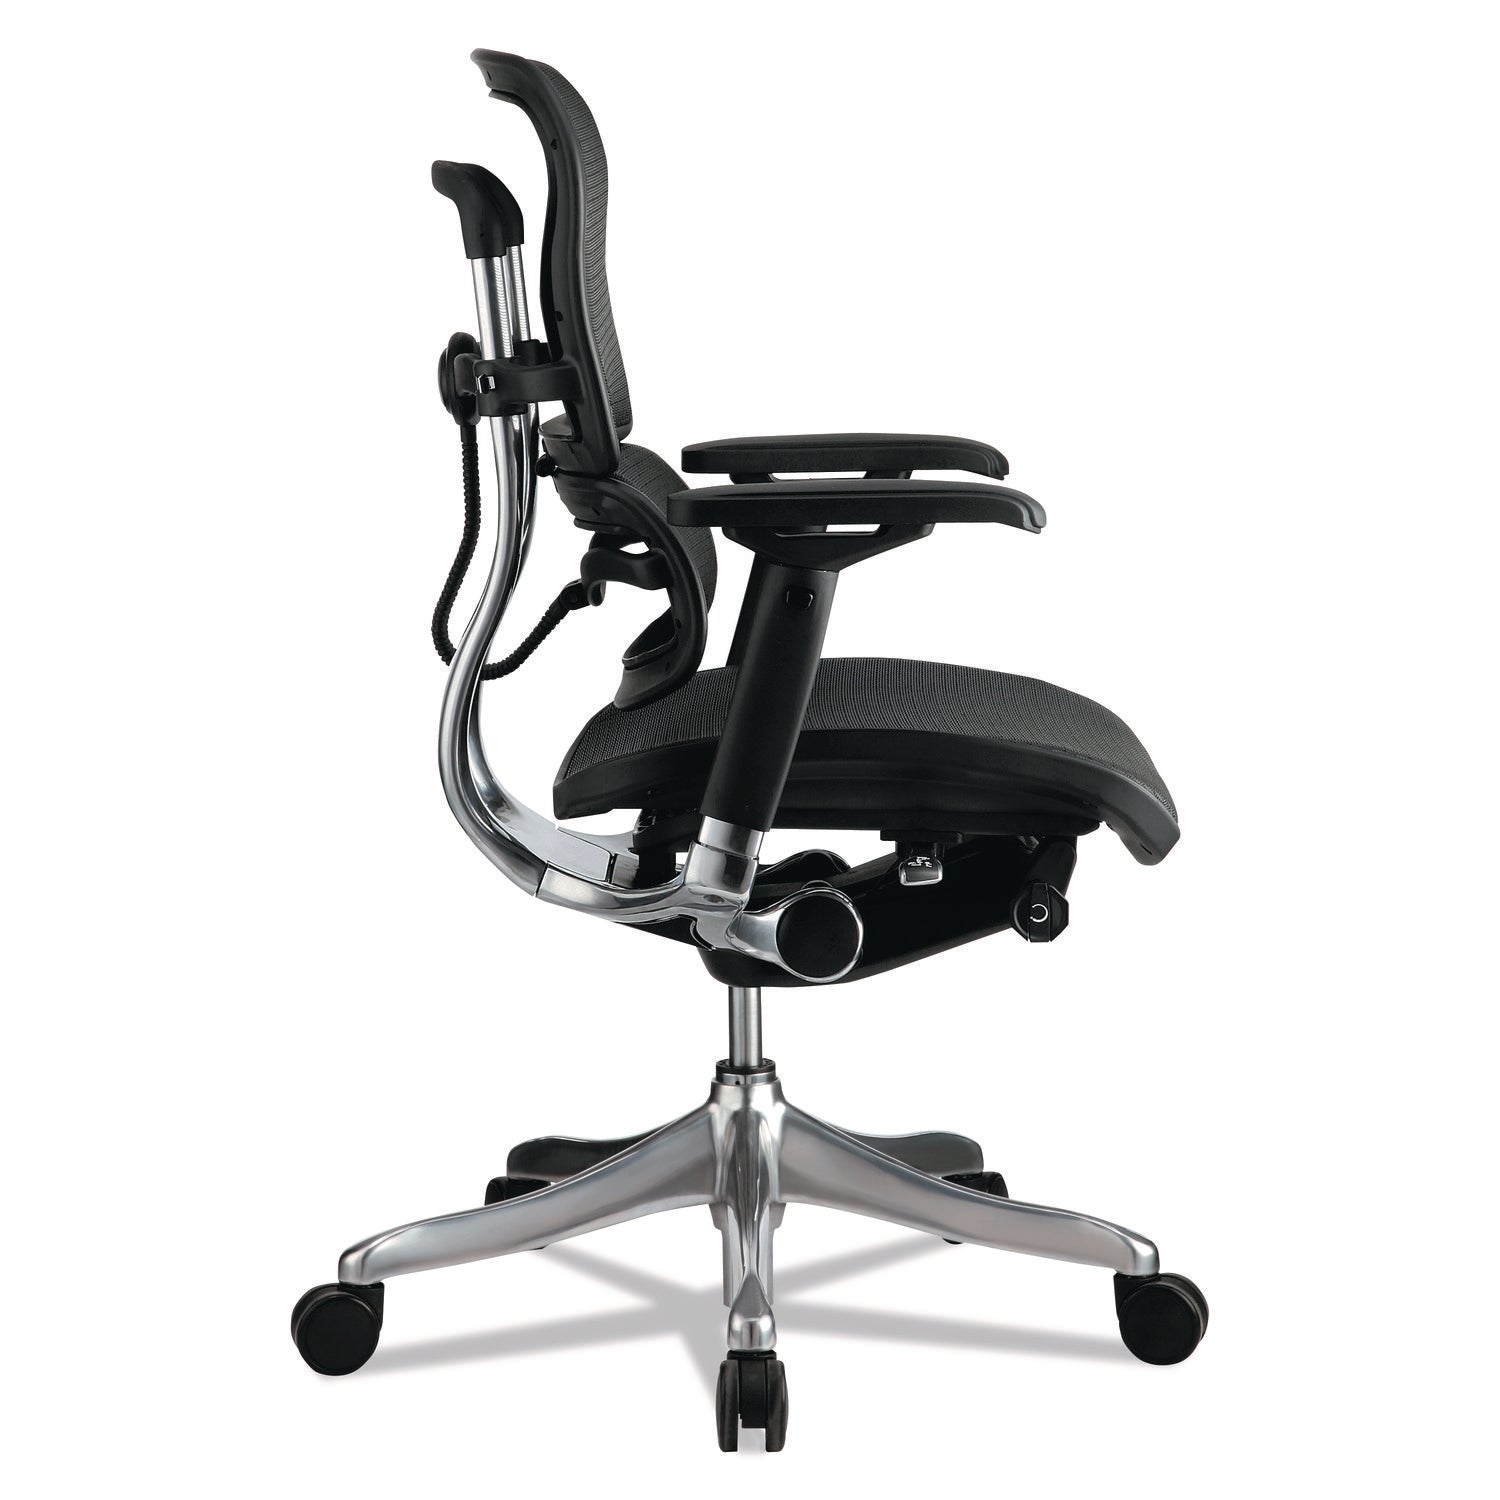 ergohuman-elite-mid-back-mesh-chair-supports-up-to-250-lb-1811-to-2165-seat-height-black_eutme5ergltn15 - 3